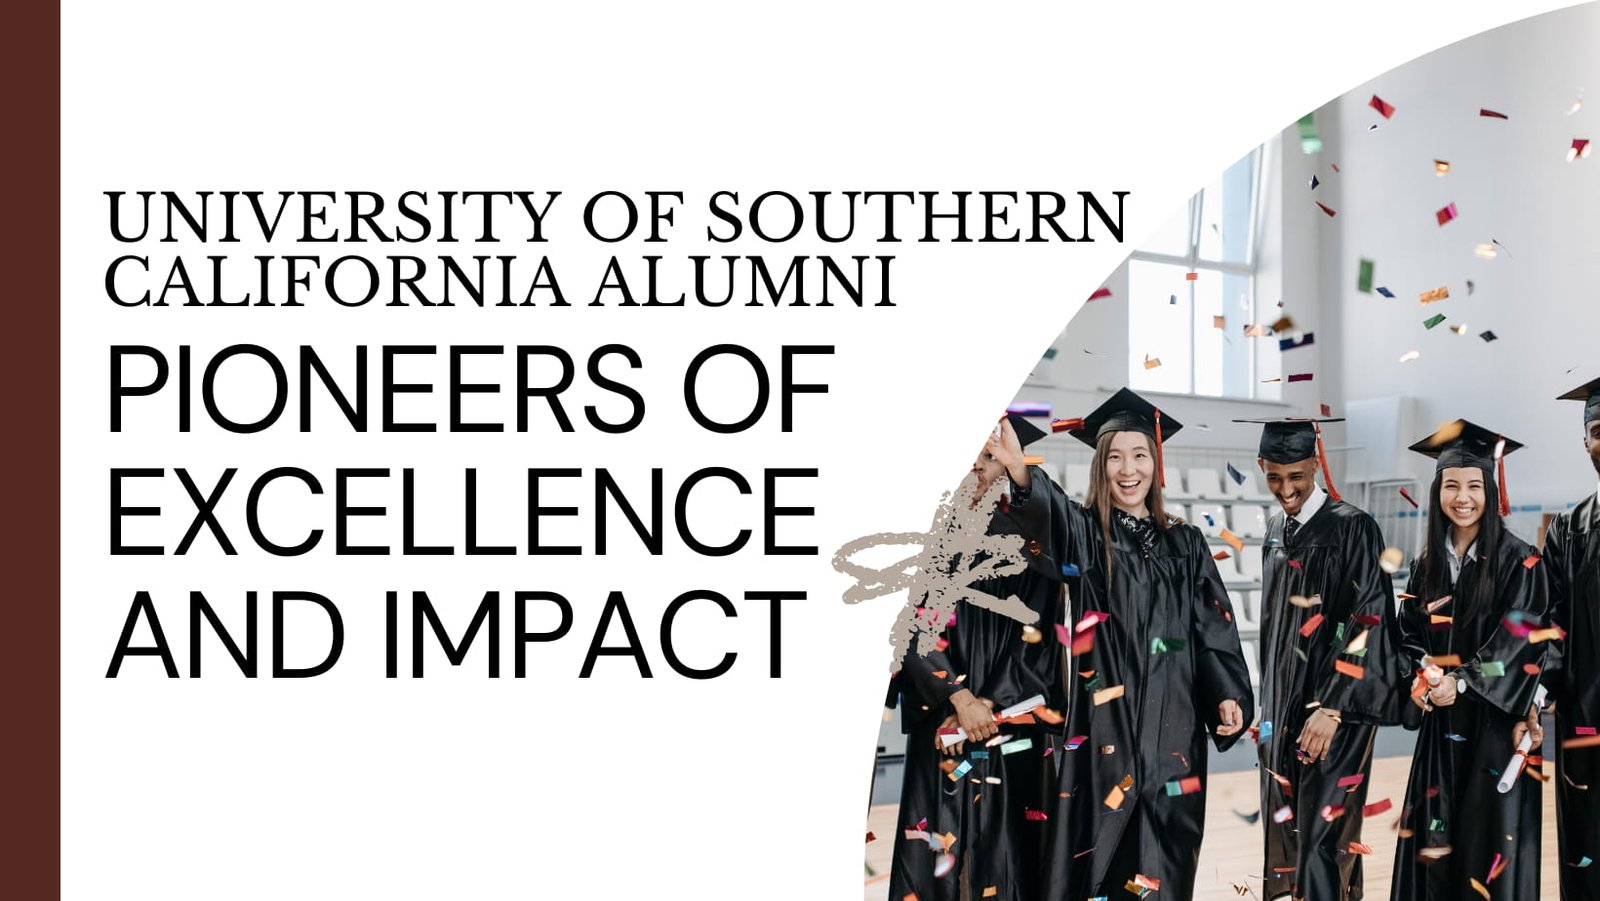 University of Southern California Alumni: Pioneers of Excellence and Impact